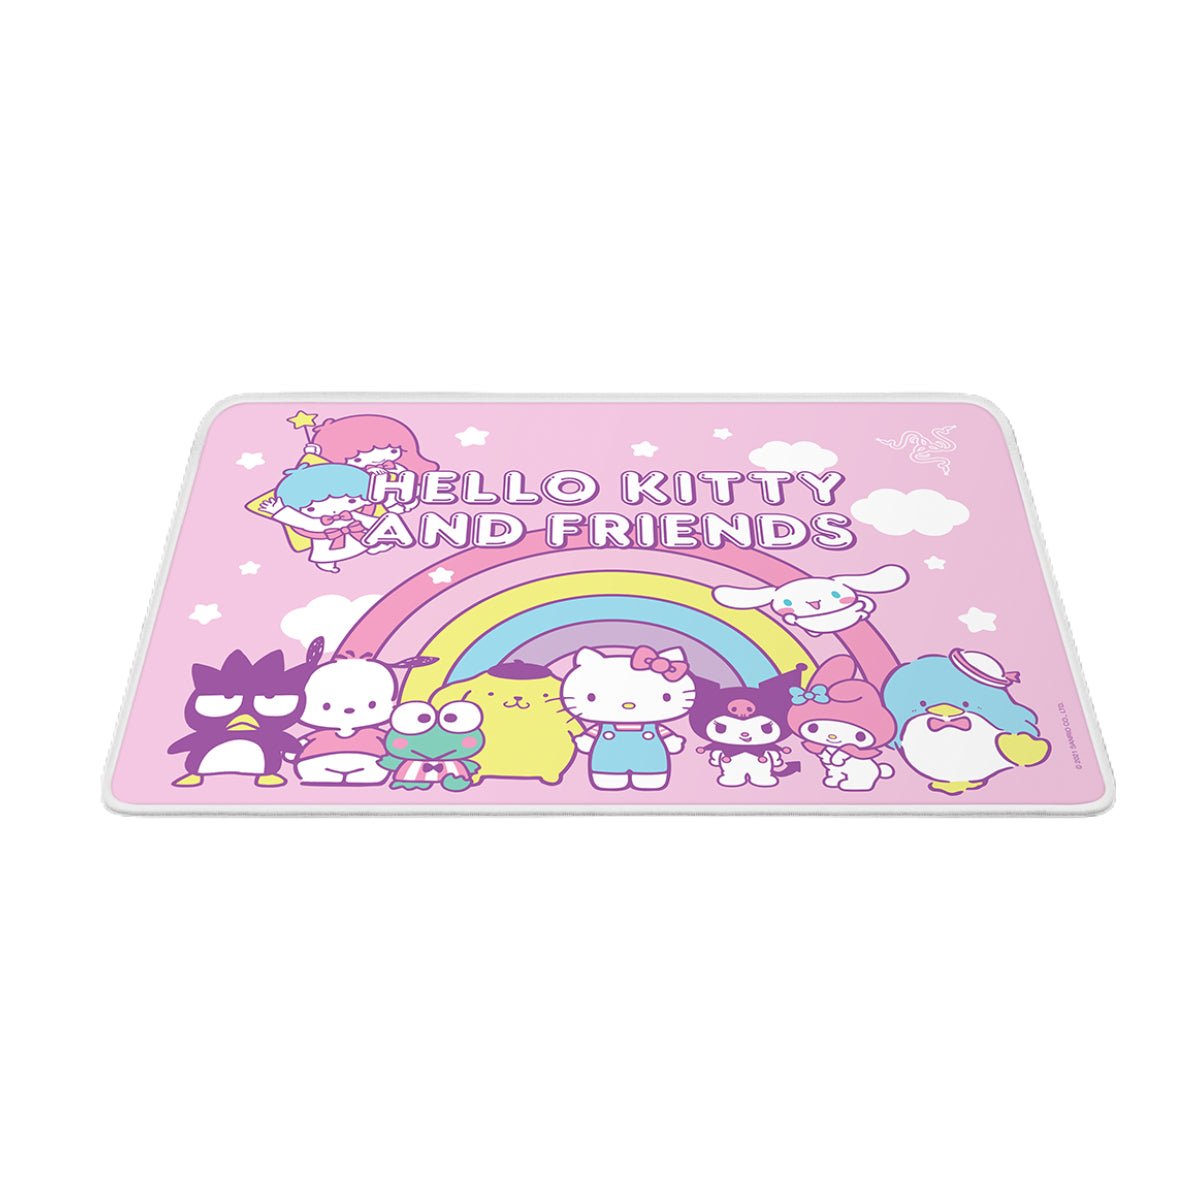 Razer DeathAdder Essential Gaming Mouse + Goliathus Mouse Mat Bundle - Hello Kitty and Friends Edition - Store 974 | ستور ٩٧٤